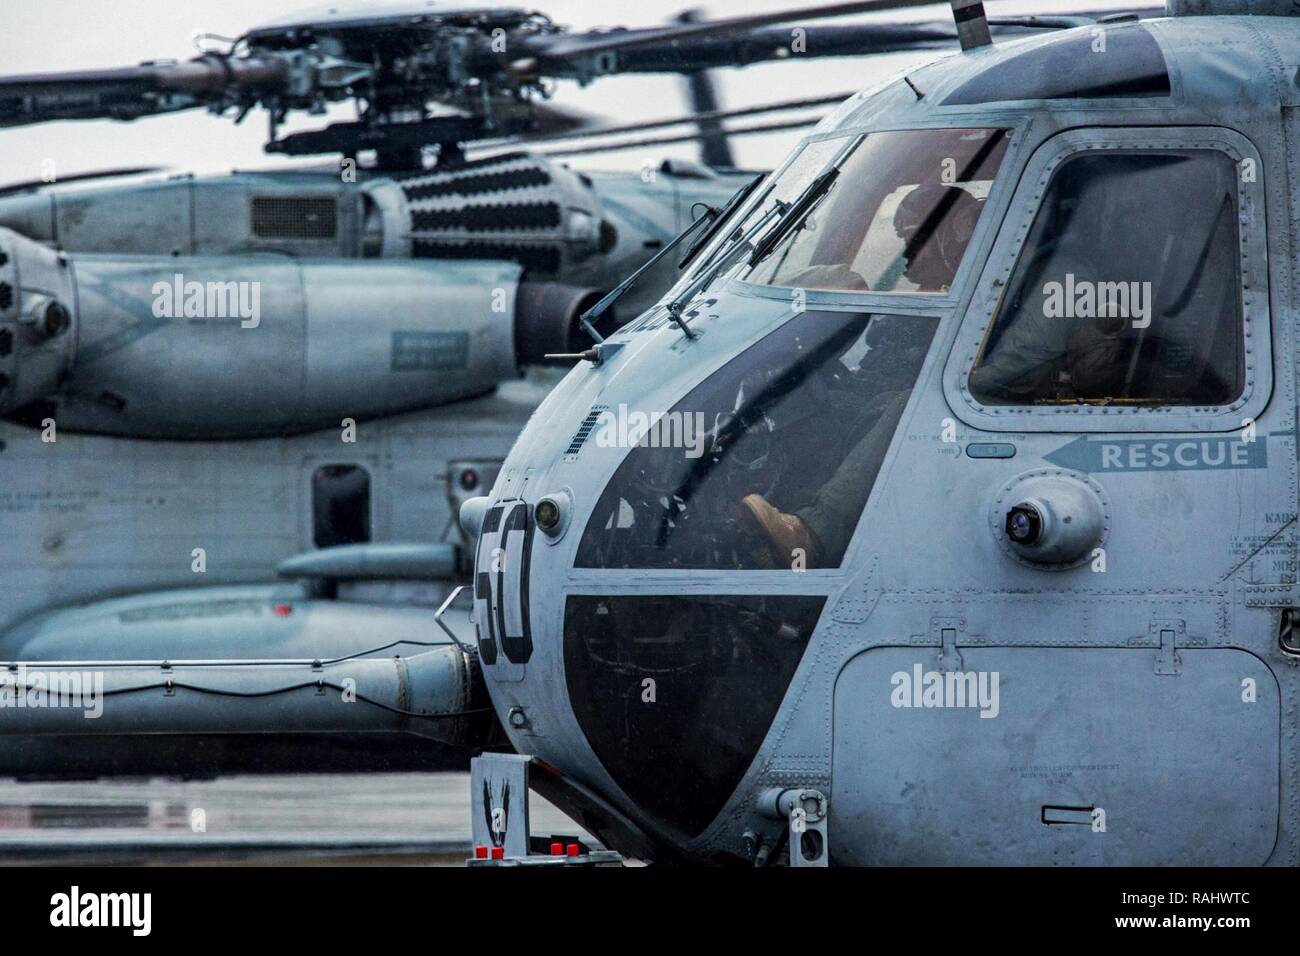 U.S. Marines with Marine Heavy Helicopter Squadron 464 prepare for another take off during a “Max Launch”, Marine Corps Air Station New River, N.C., Feb. 3, 2017. The purpose for this flight is to celebrate a rarely achieved maintenance goal of having all aircraft operational at one time. Stock Photo